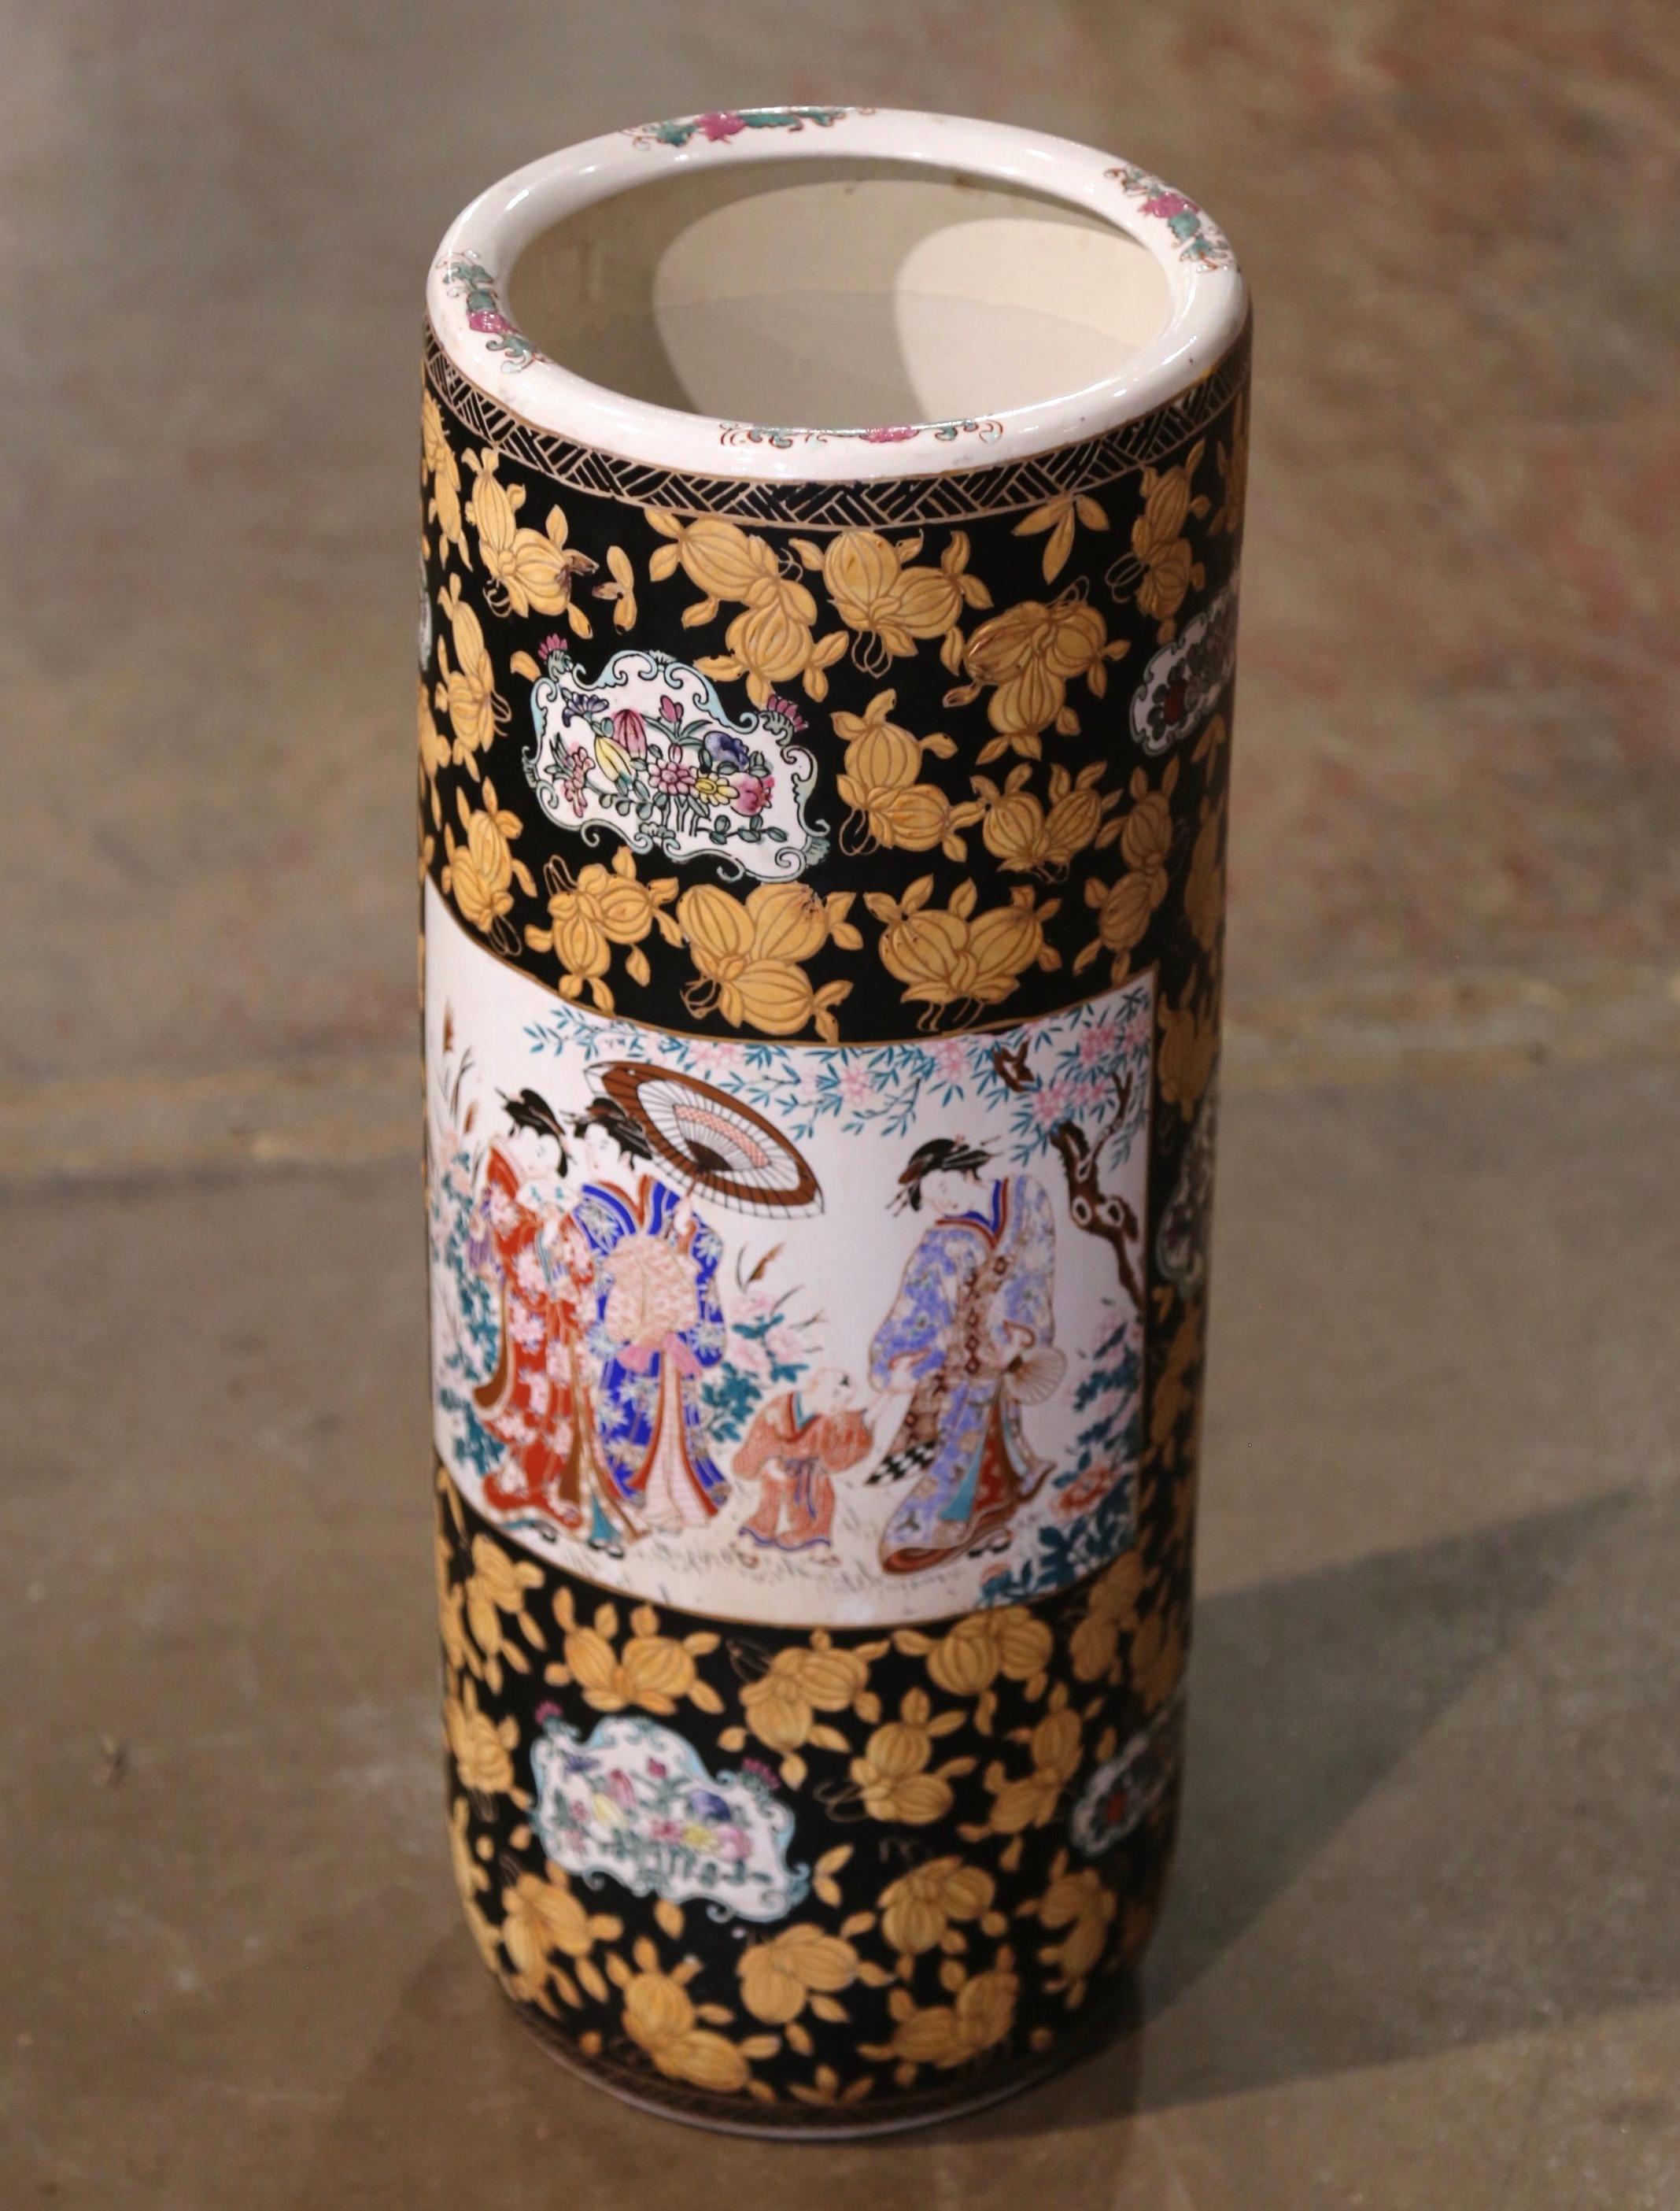 Created in China circa 1950, this large colorful Famille Rose umbrella stand is round in shape and features hand painted medallions with Chinese people in traditional clothing; it is further embellished with floral and foliate motifs on a black